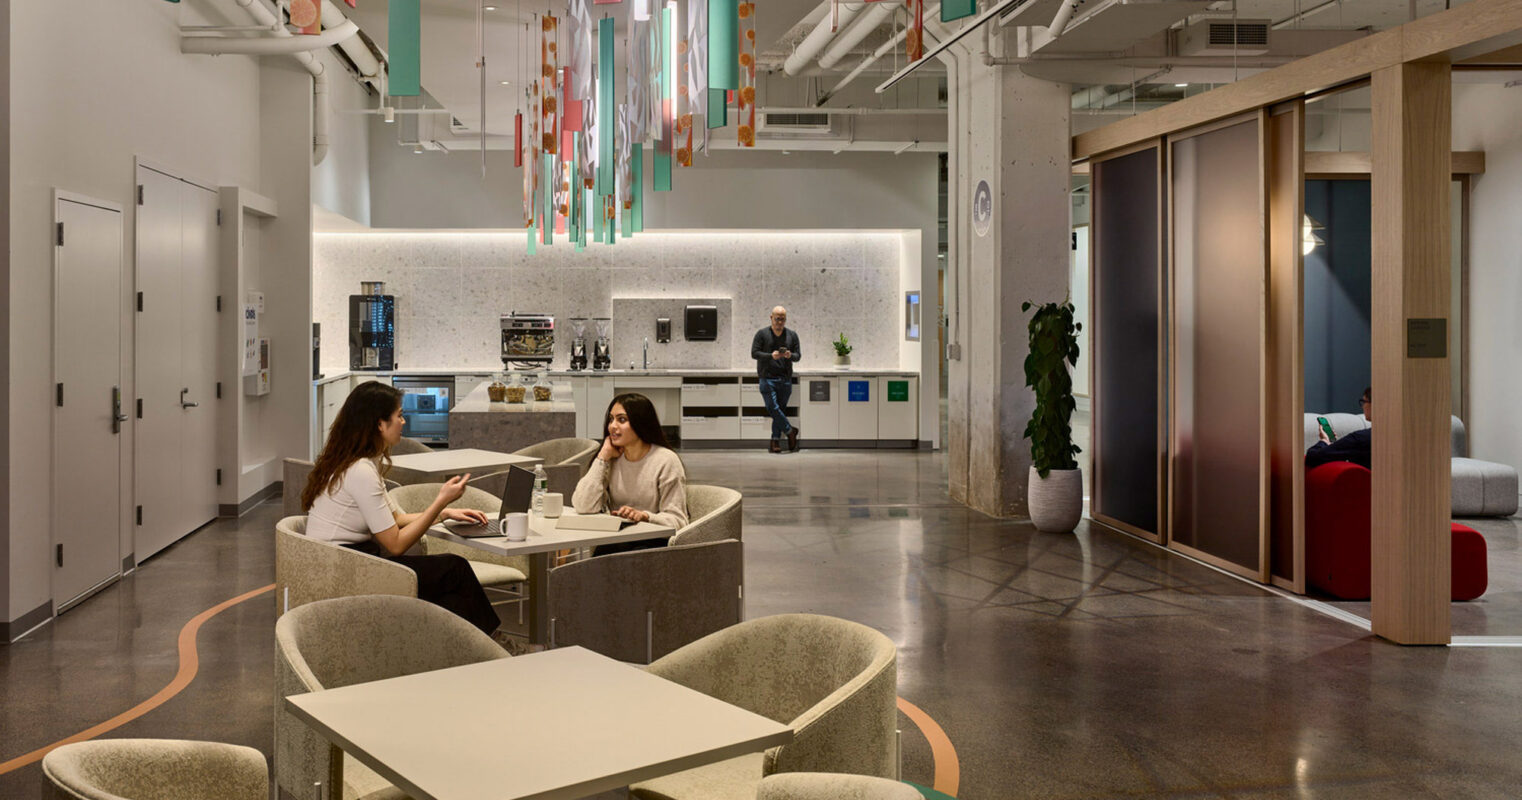 Modern office lounge with hanging fabric art installation, neutral-toned furniture centered around a circular table, and a kitchenette in the background with a person standing by the counter. The open-concept area features concrete pillars and wood-trimmed glass partitions.